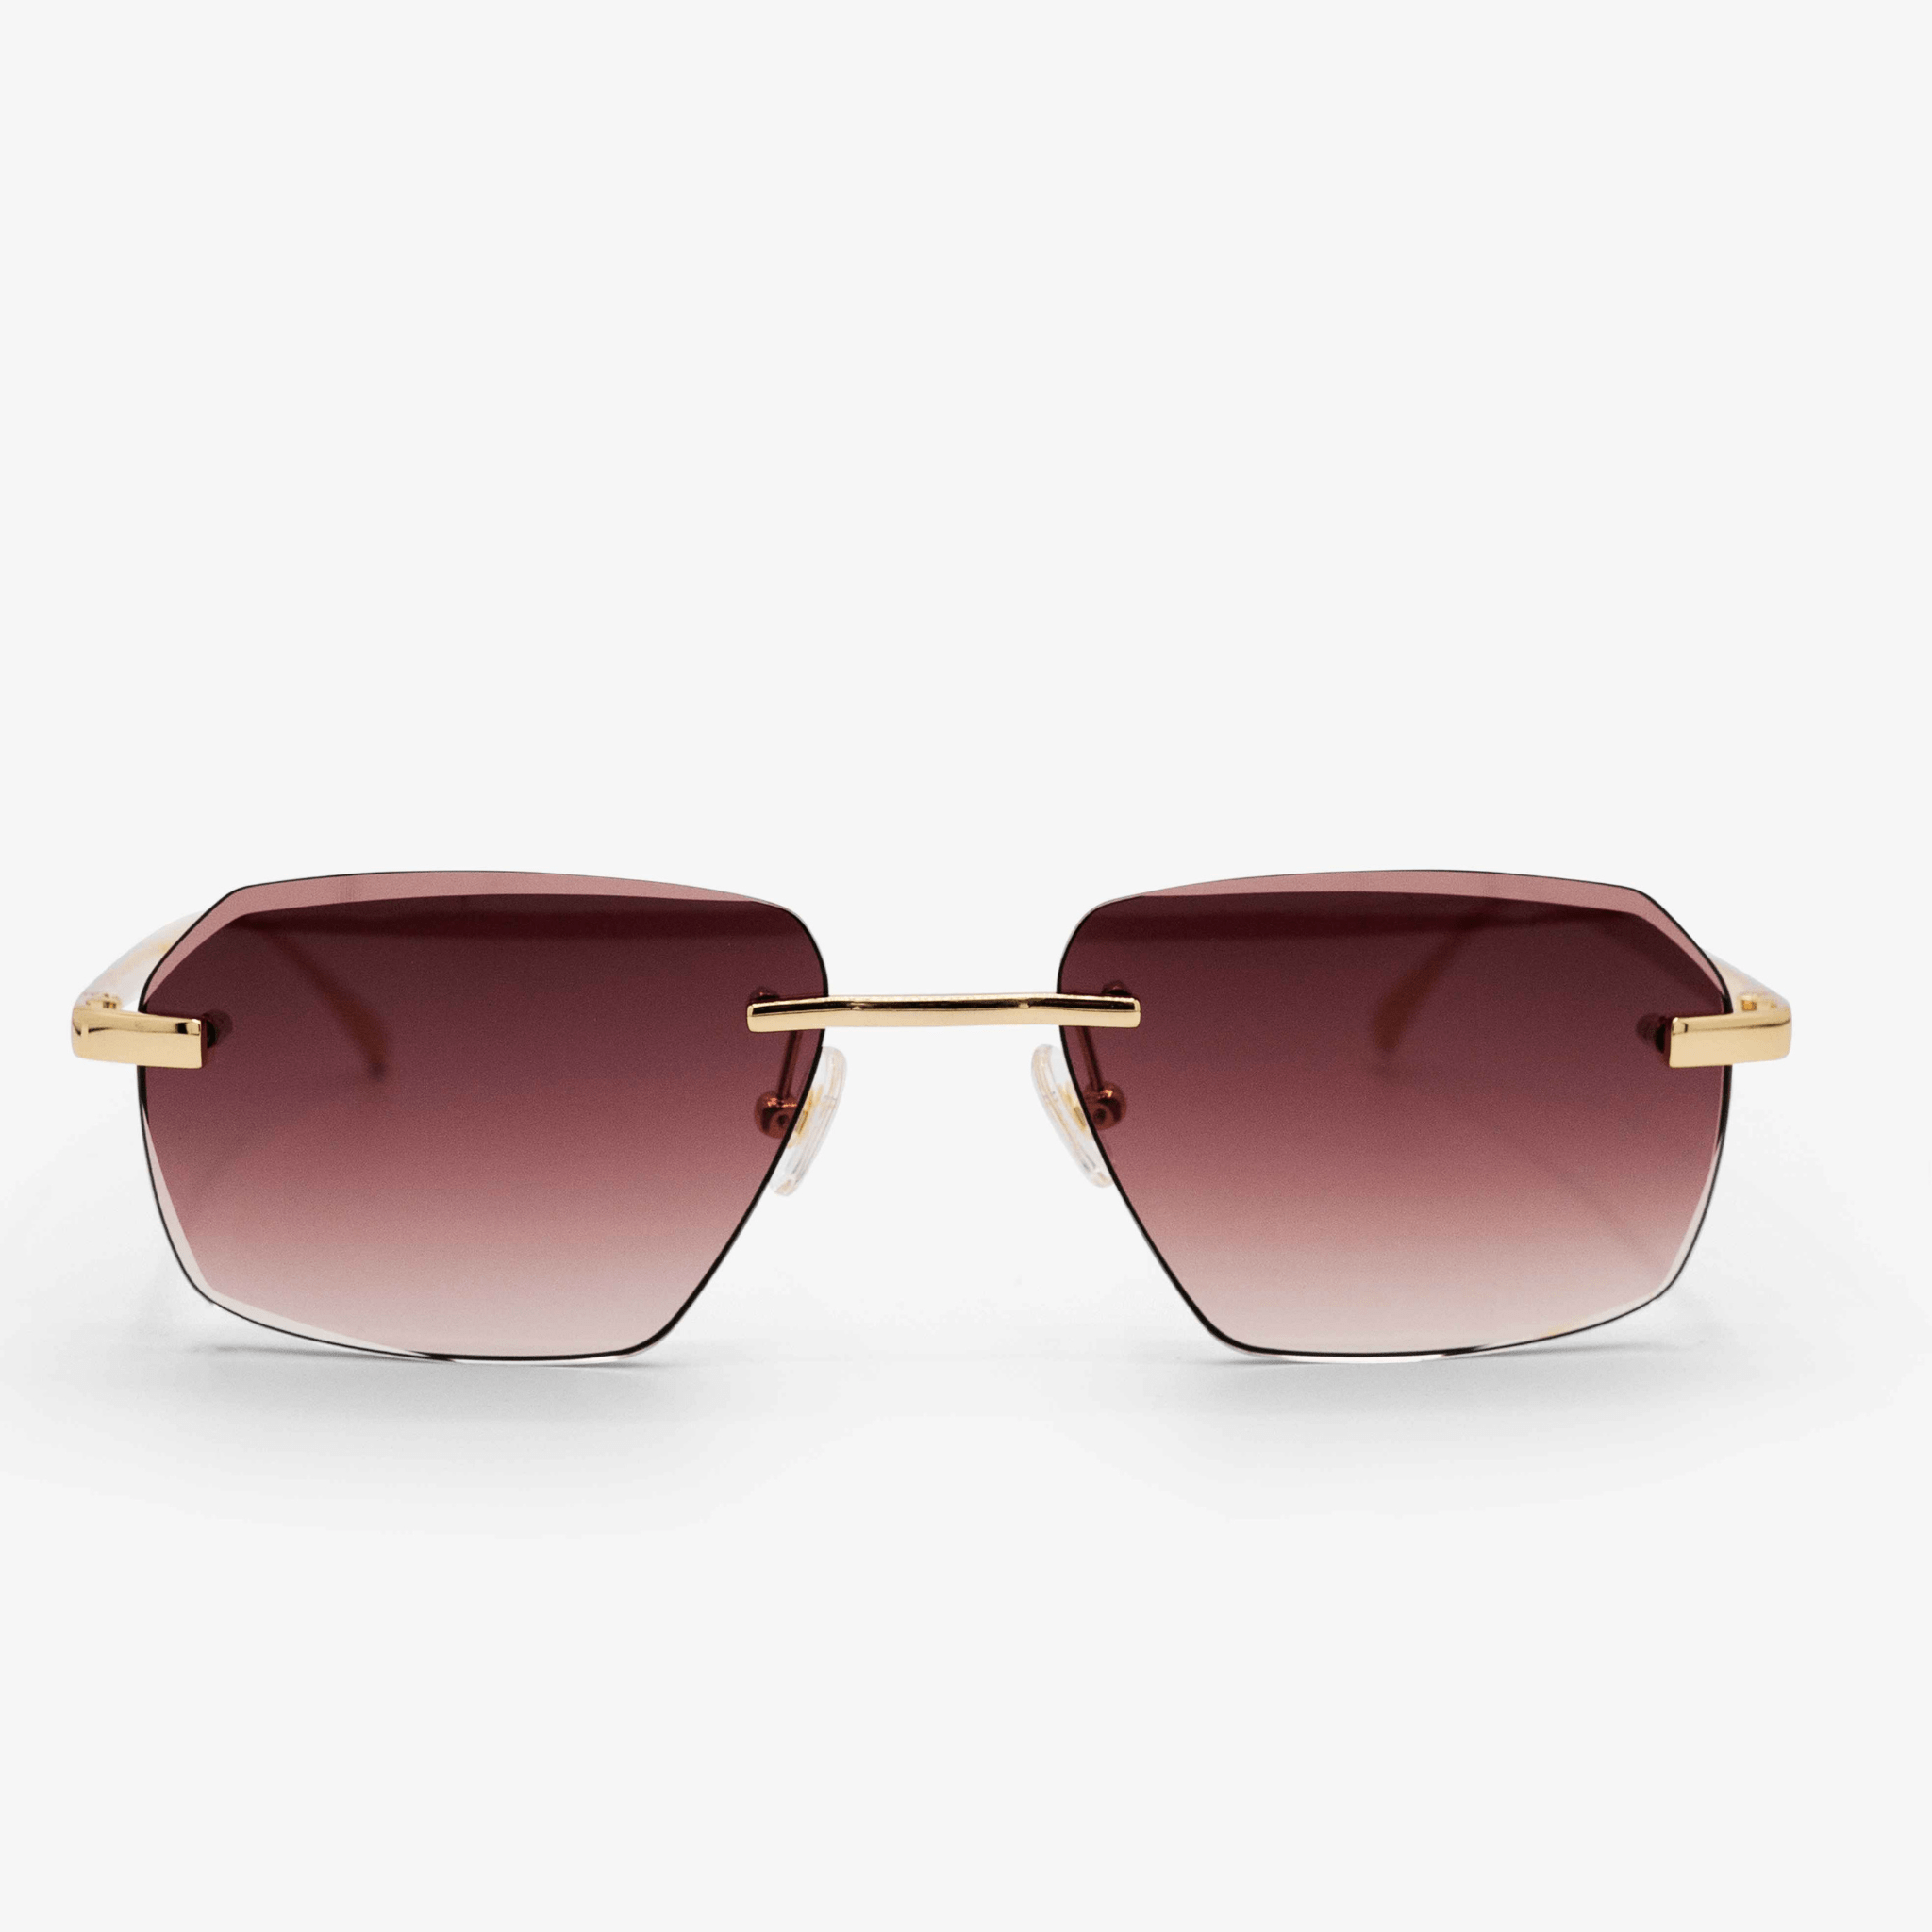 Model Sancy modern sunglasses featuring a brown gradient diamond-cut design with rimless lenses and 18K gold accents on the arms and bridge, set against a white backdrop.